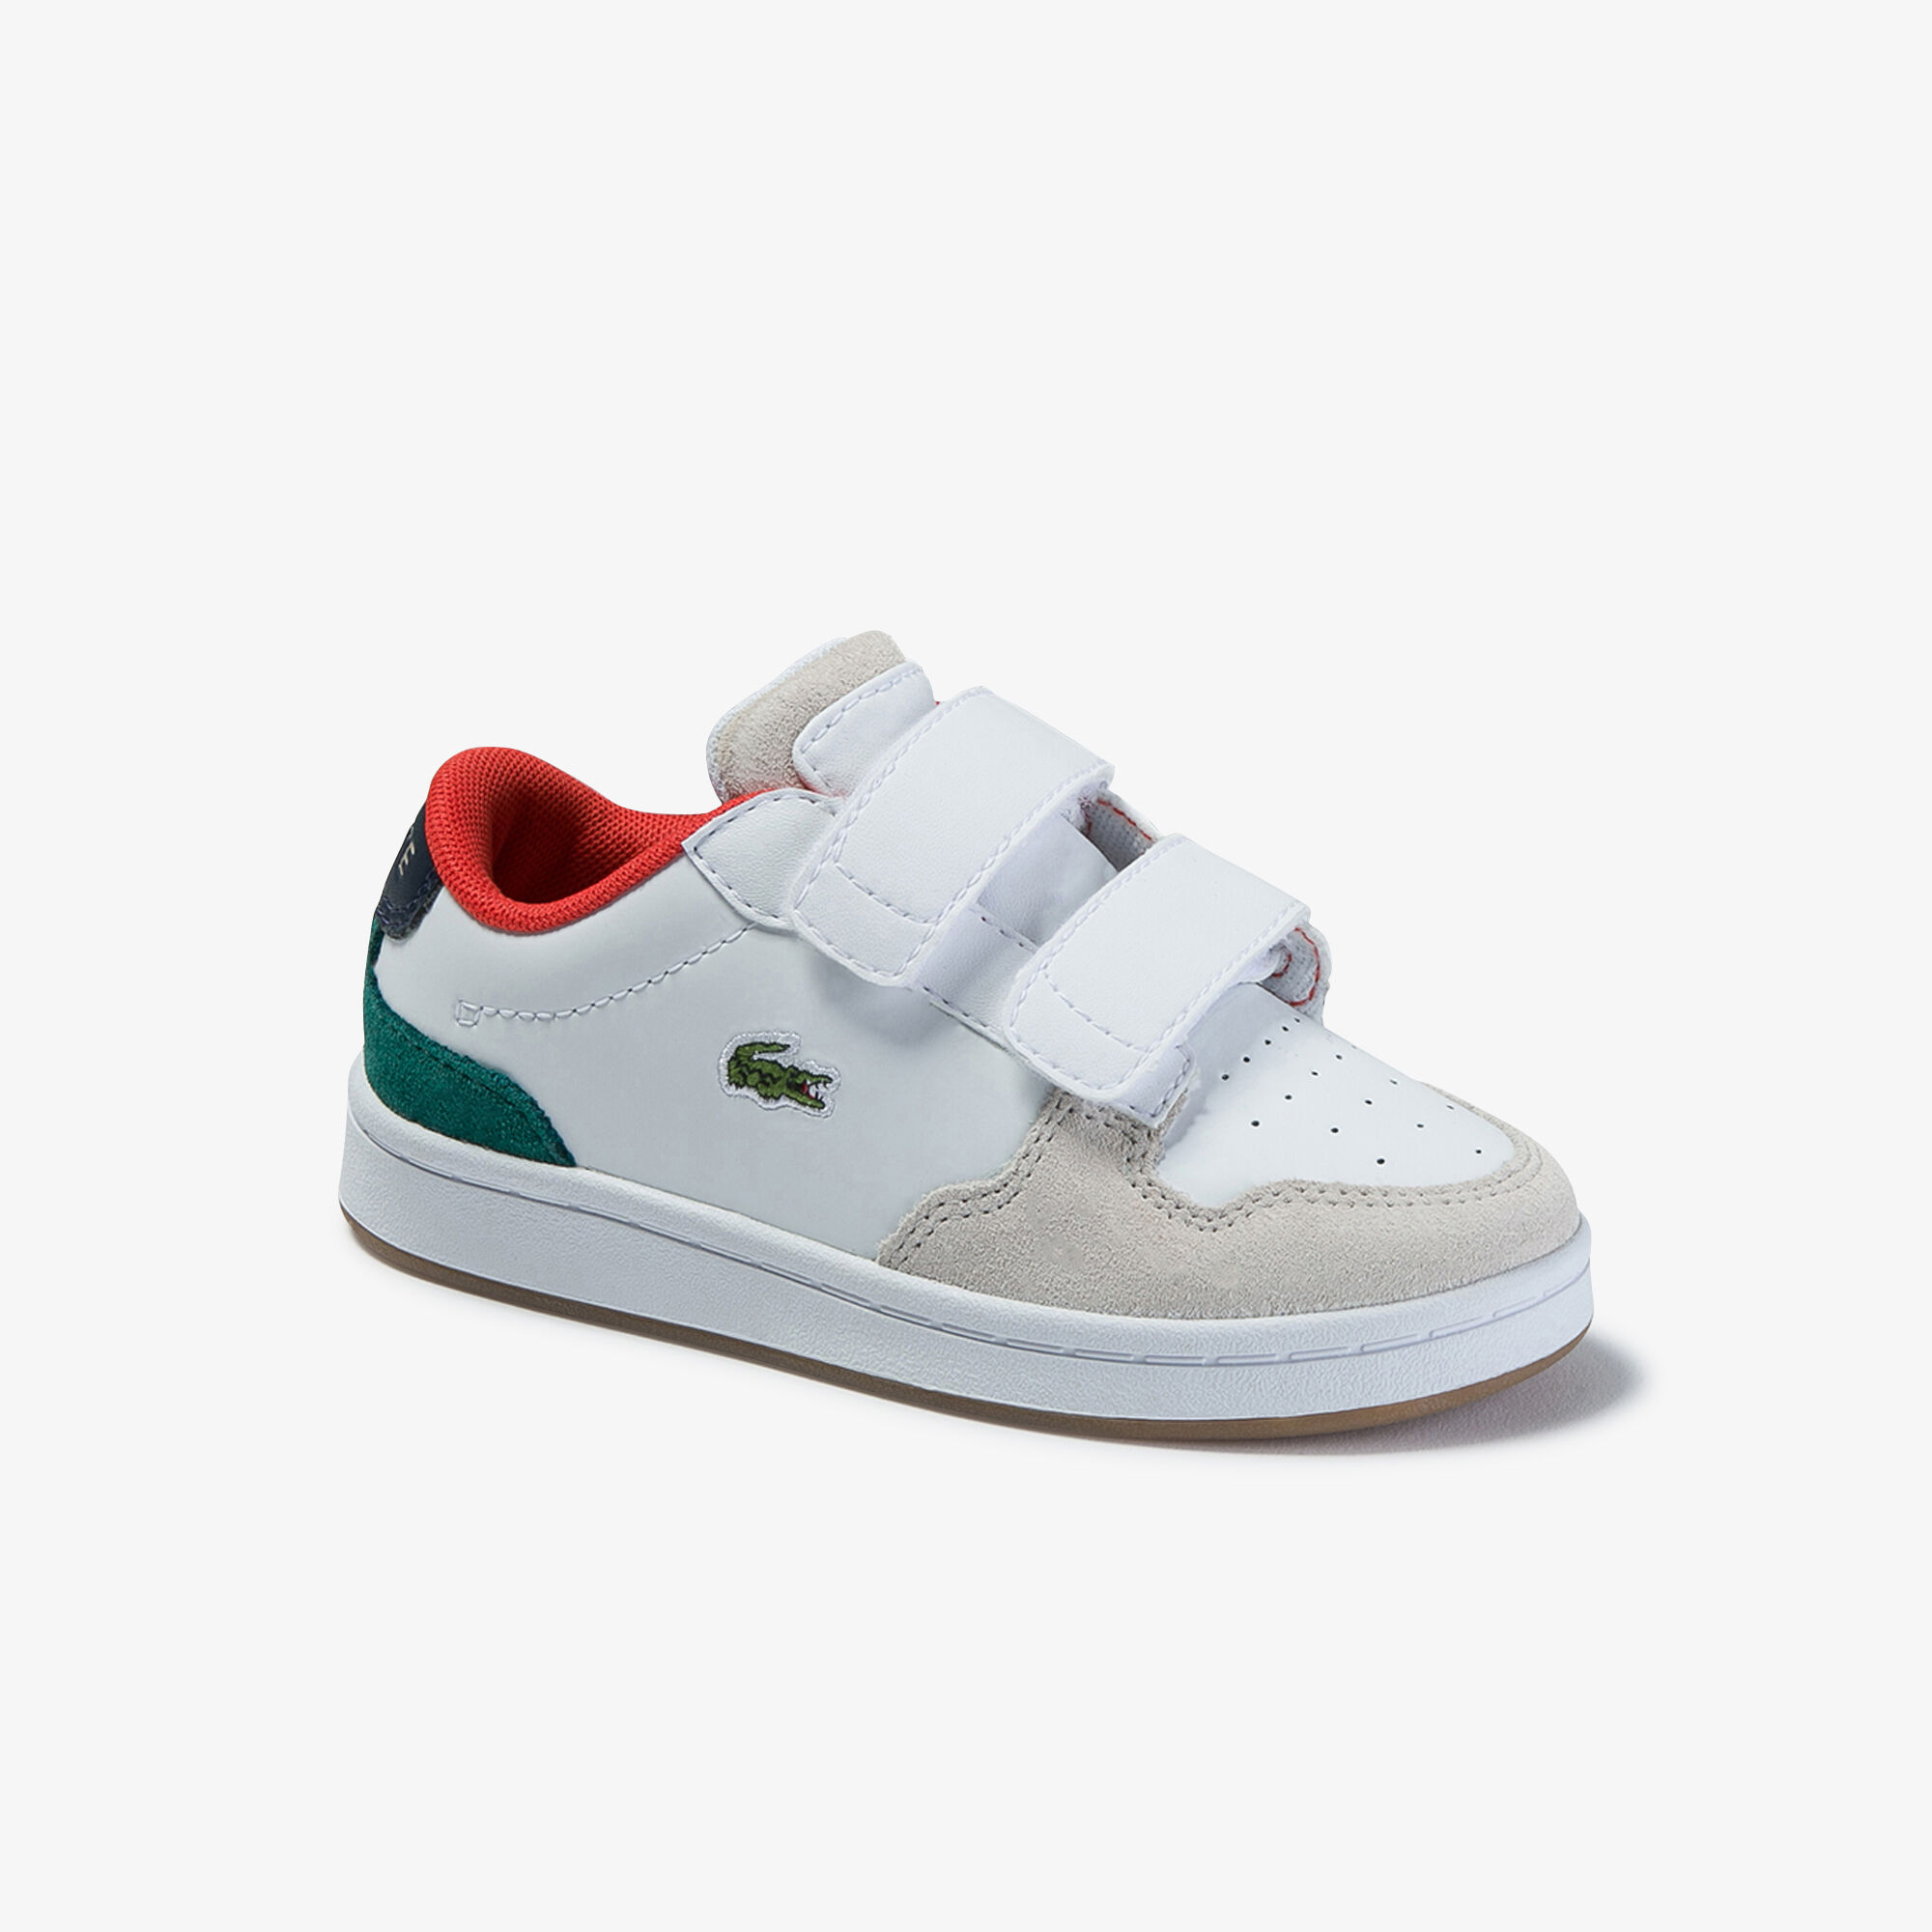 Infants' Masters Cup Metallic Leather and Suede Sneakers